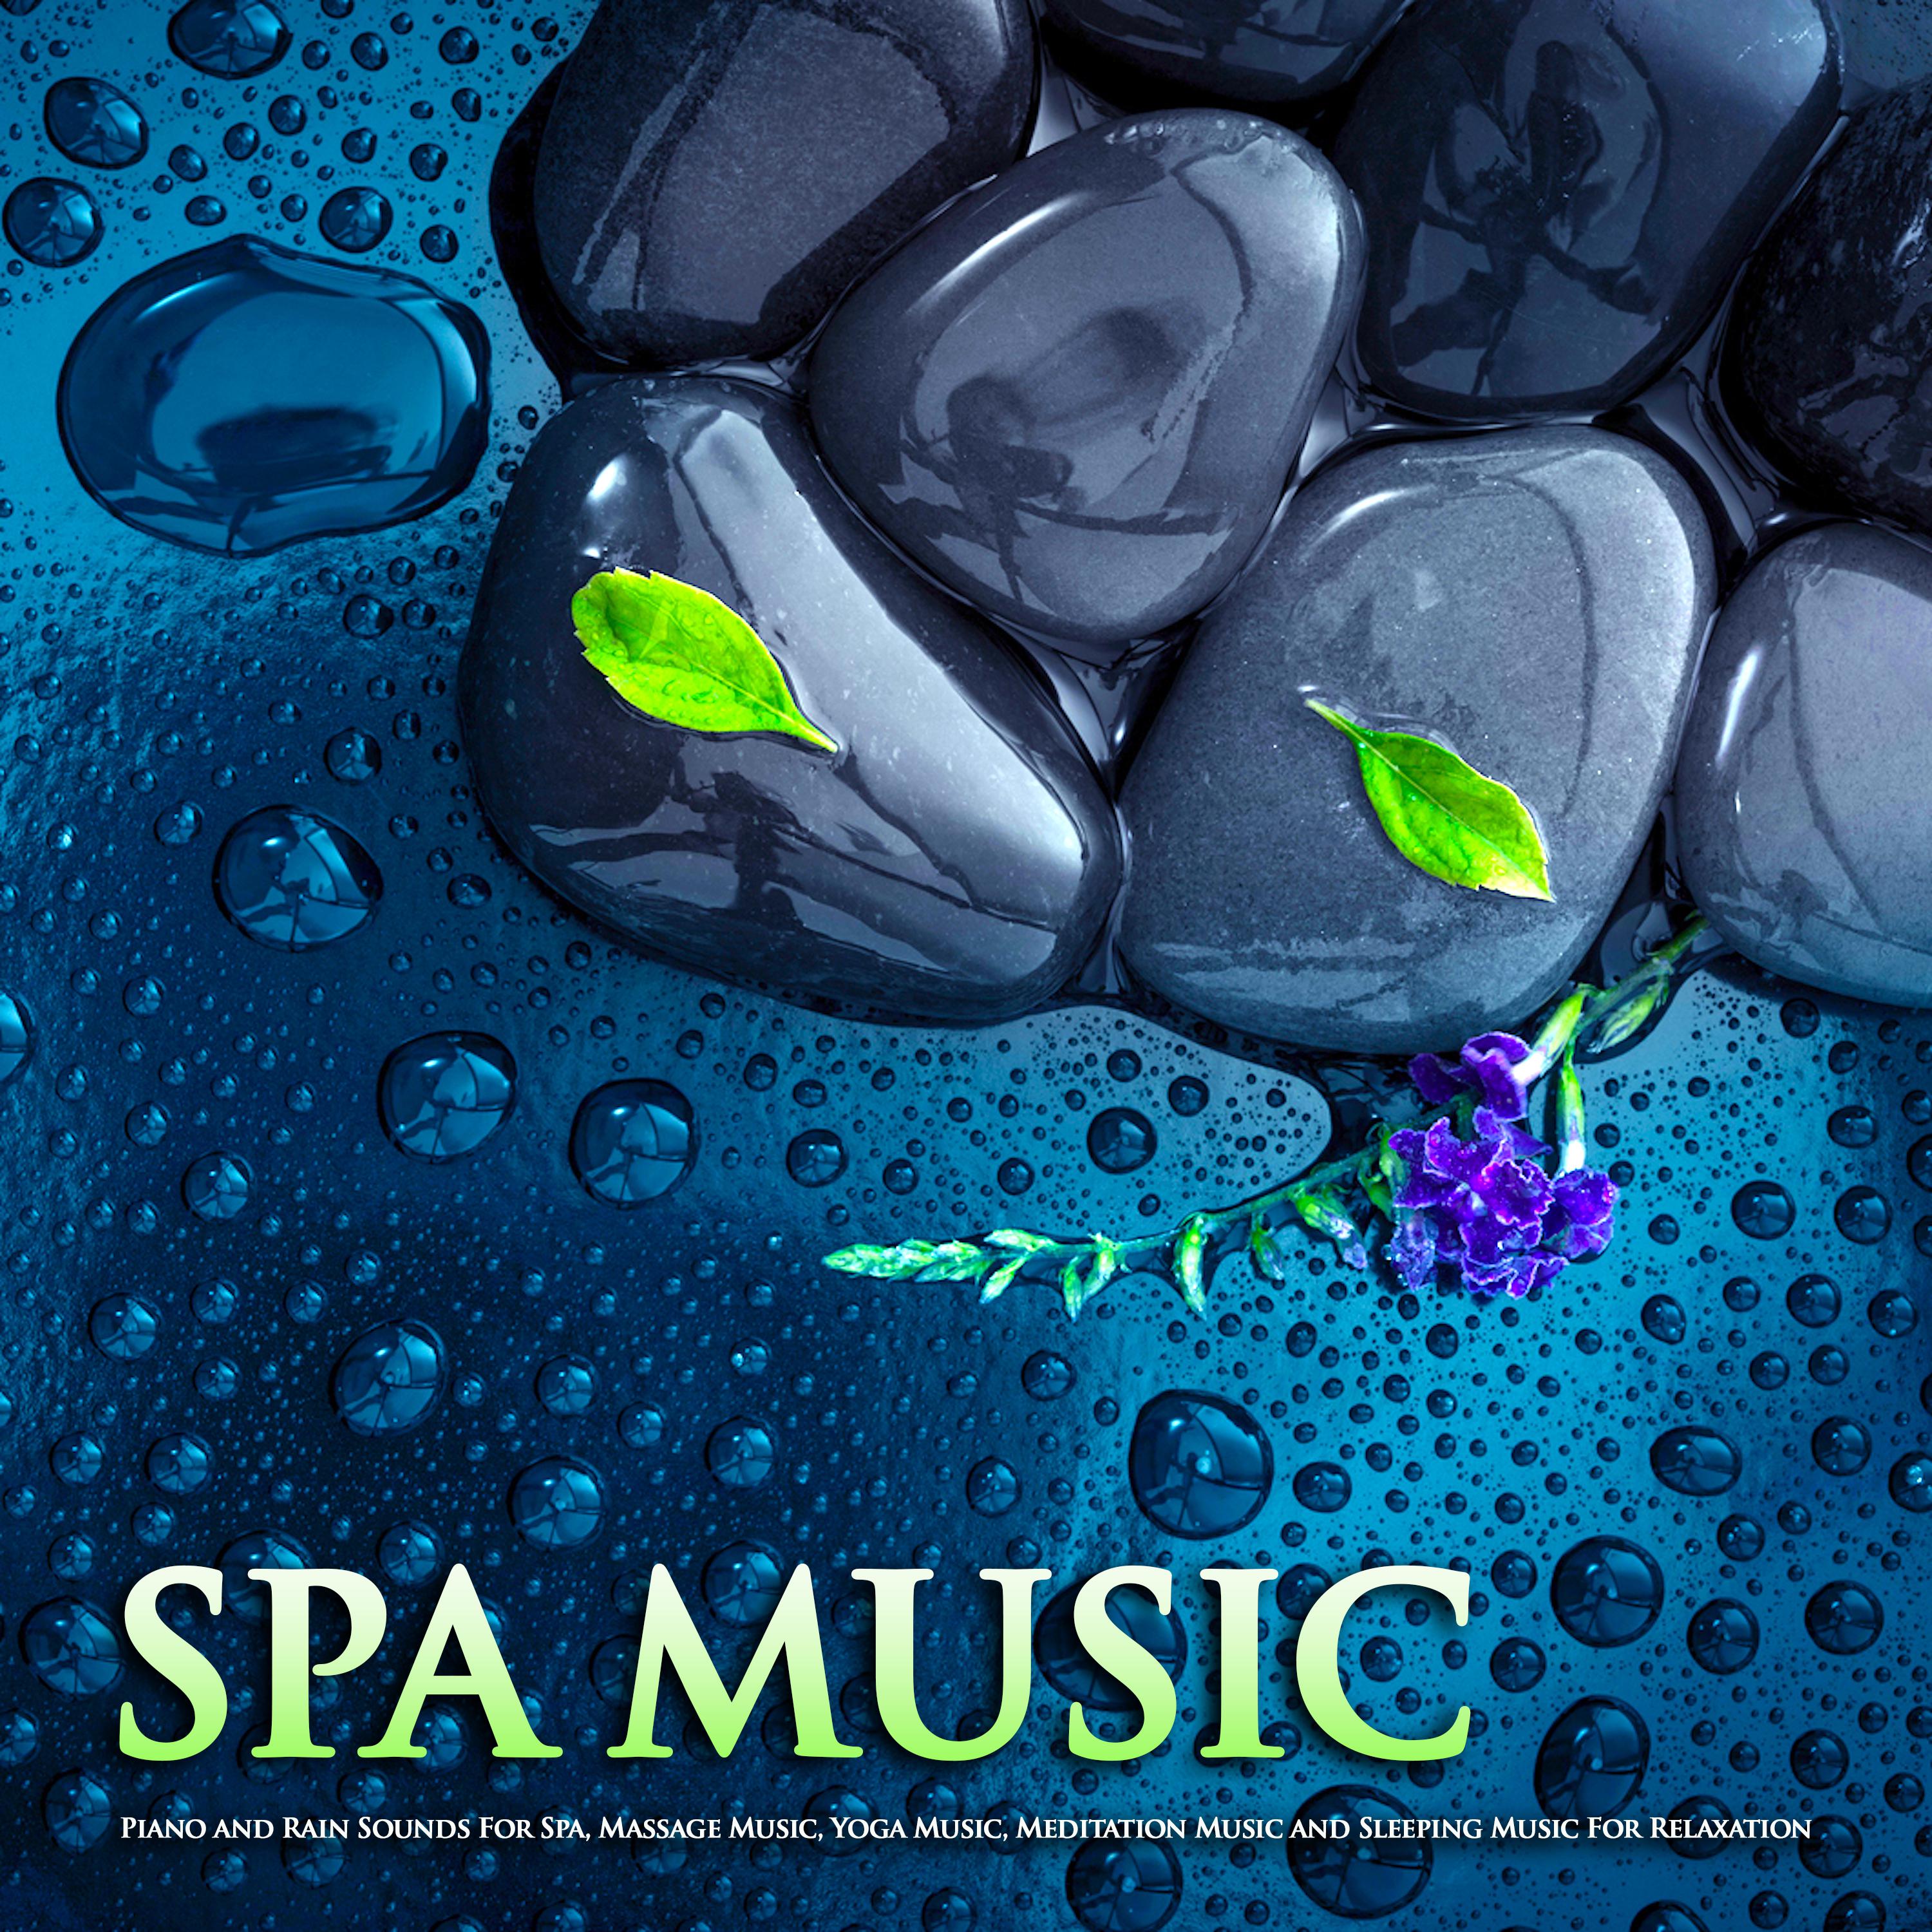 Spa Music: Piano and Rain Sounds For Spa, Massage Music, Yoga Music, Meditation Music and Sleeping Music For Relaxation